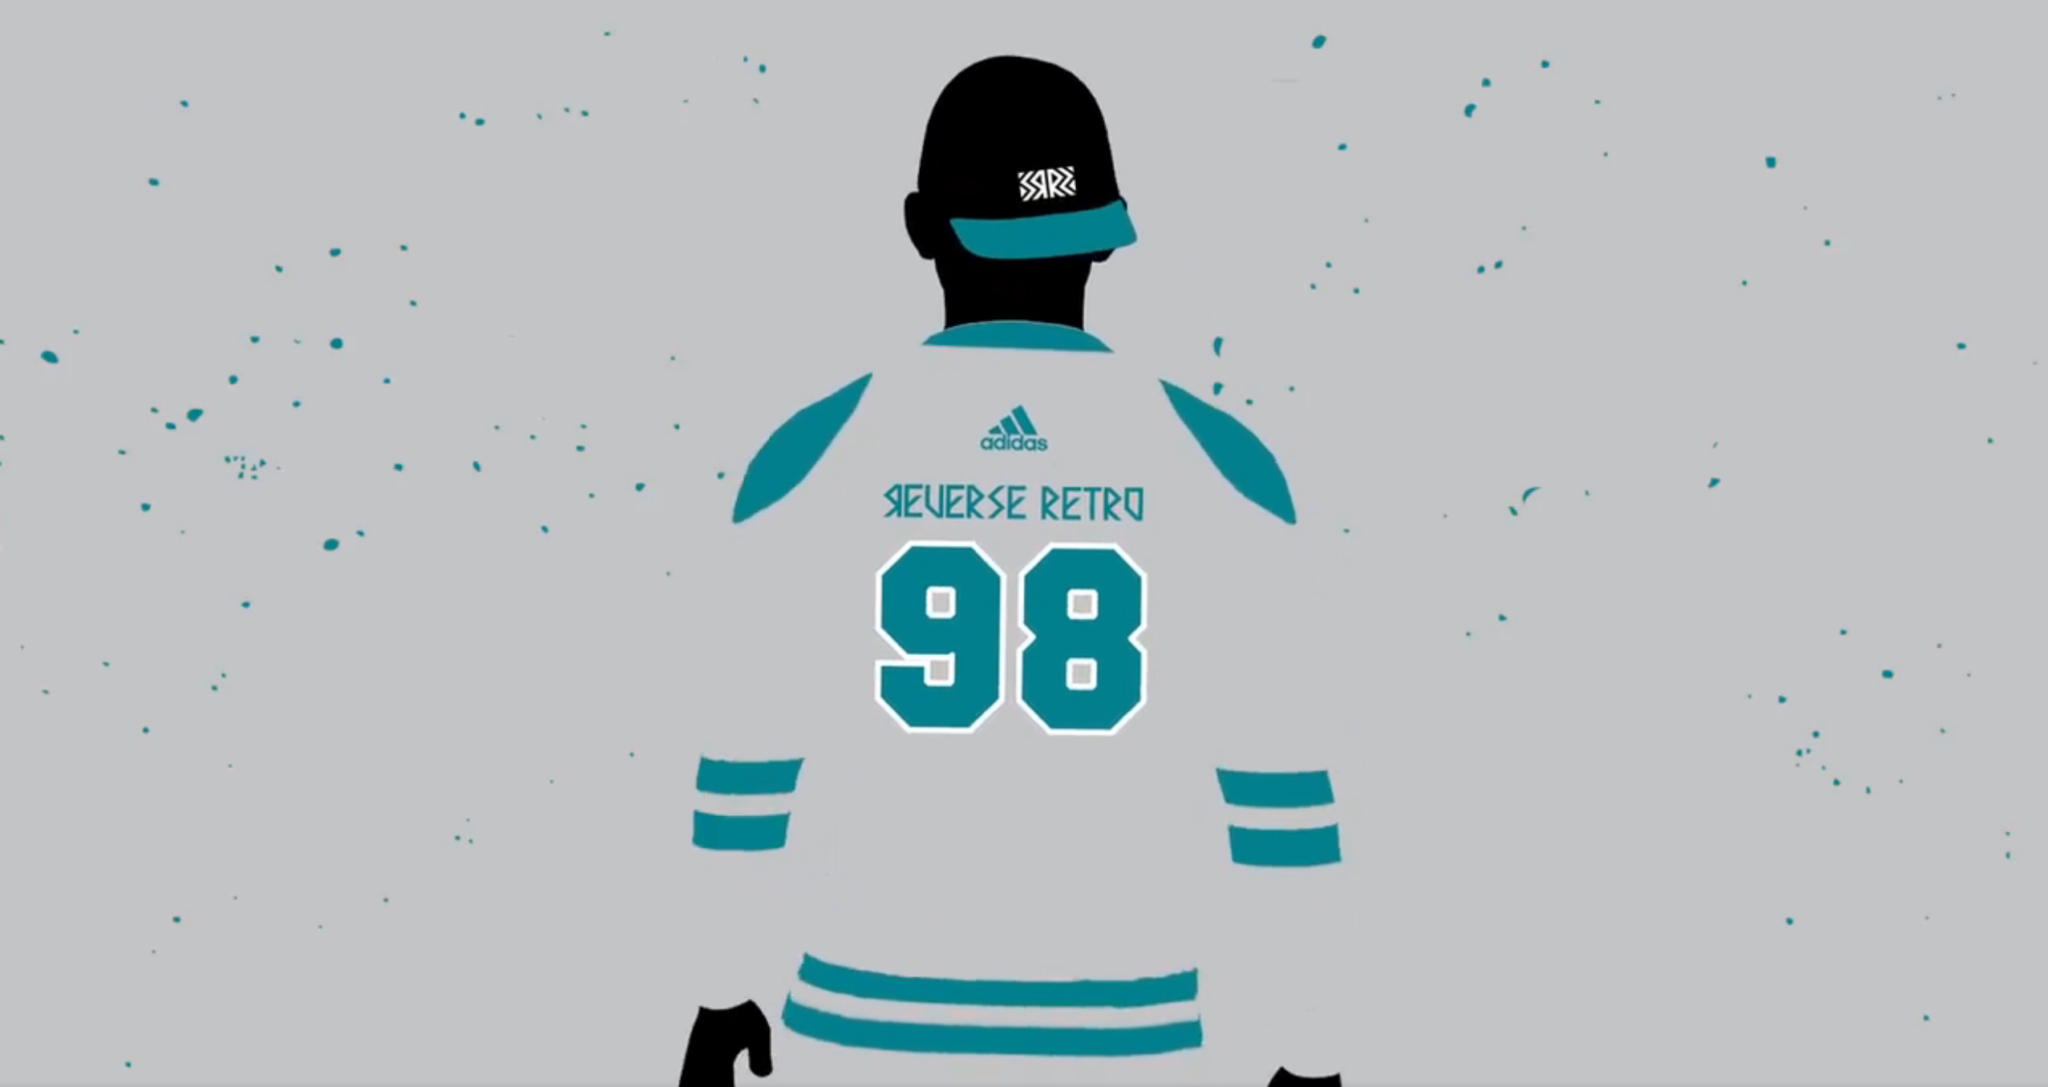 Here Are the New Adidas Uniforms for All 31 NHL Teams